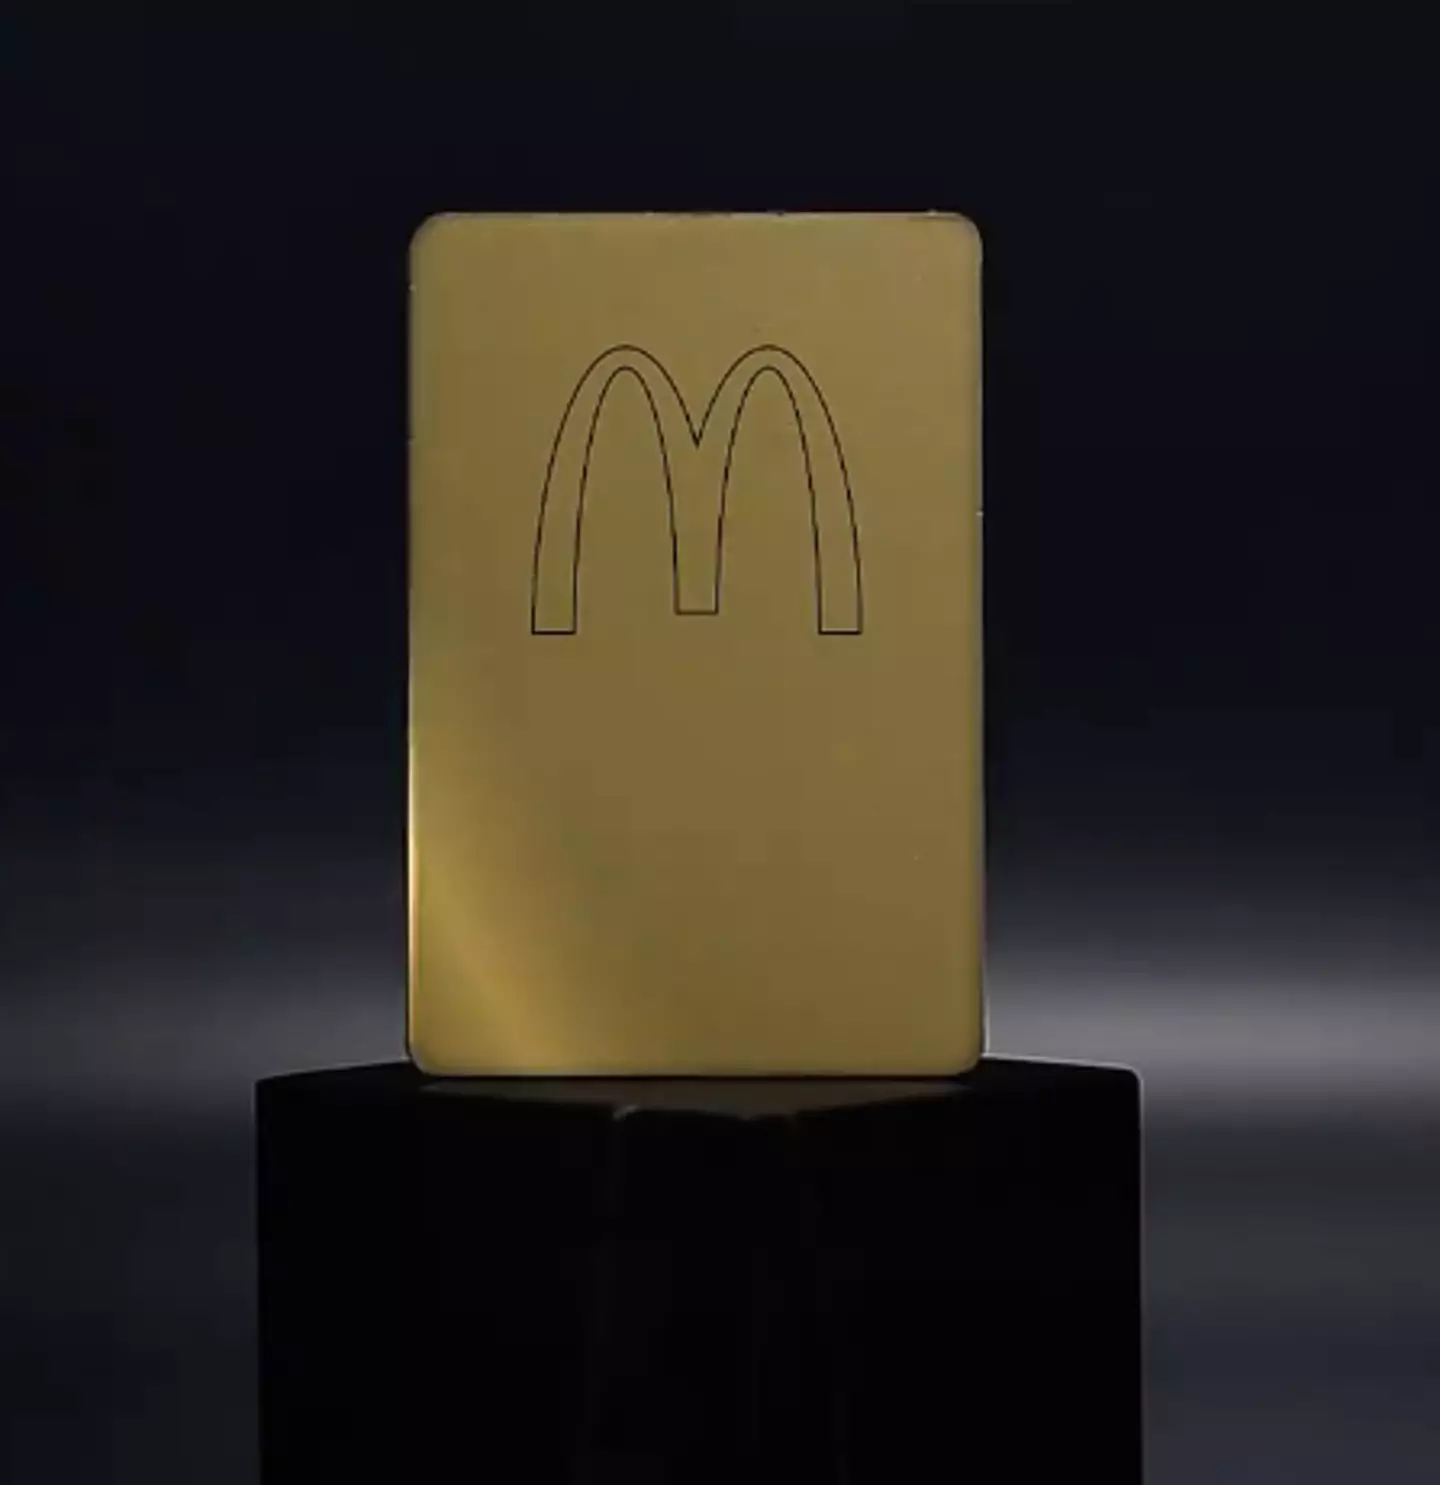 VIP McDonald's Gold Cards are up for grabs (